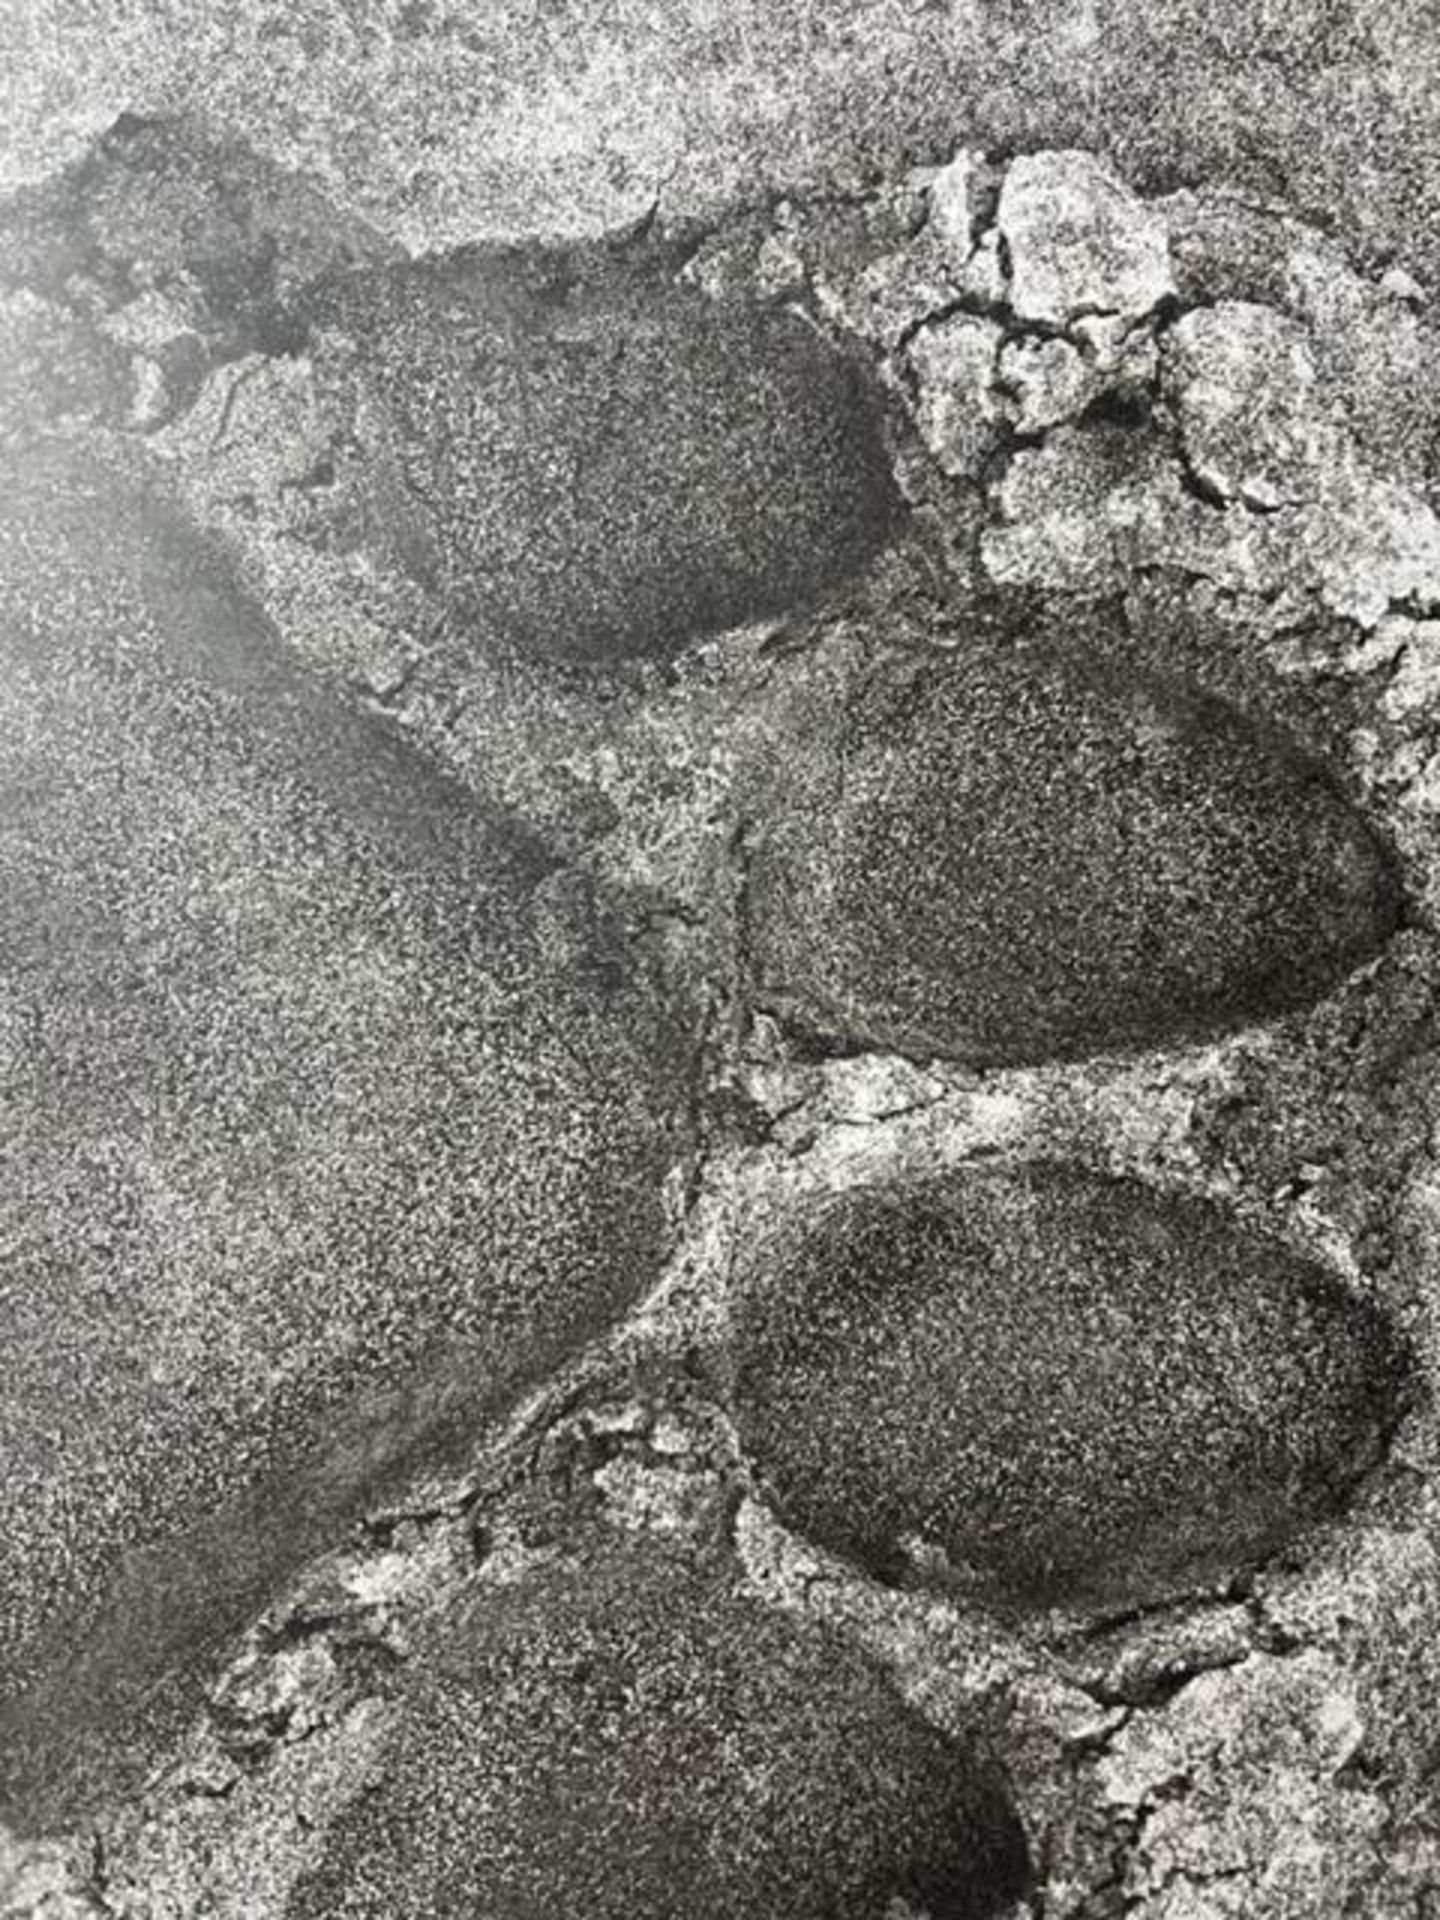 Herb Ritts "Untitled" Print. - Image 2 of 6